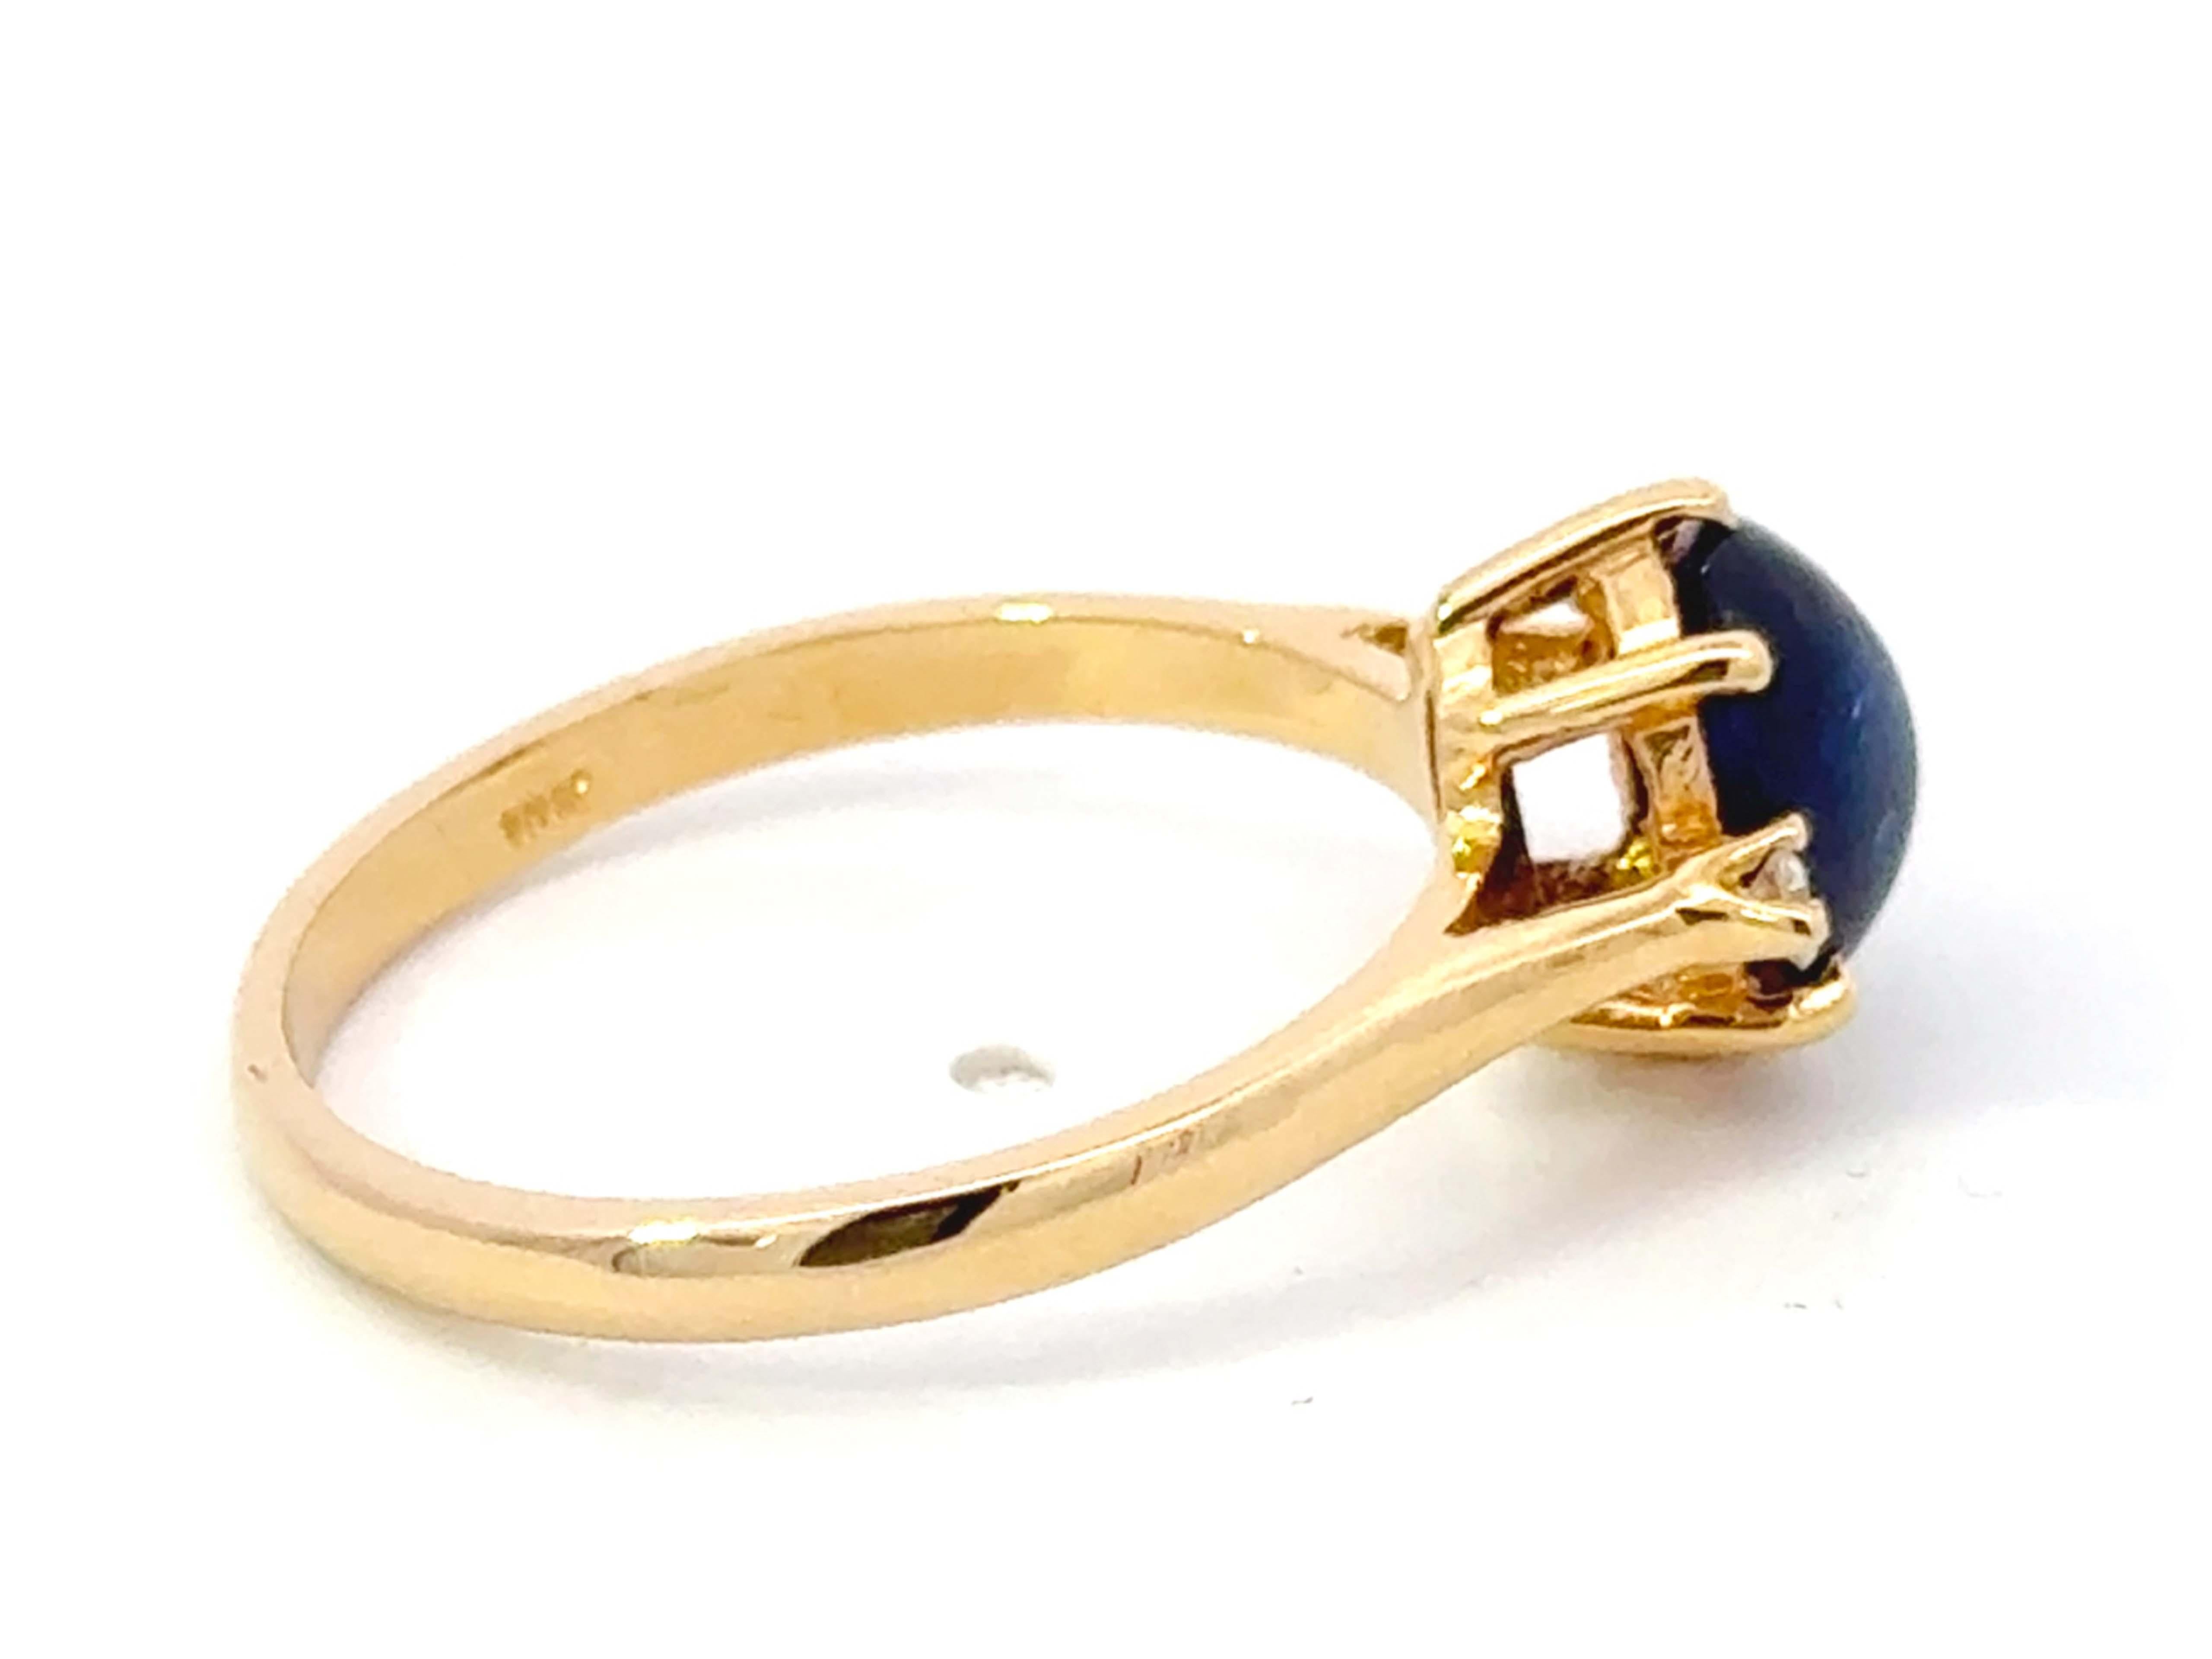 Women's Cabochon Blue Sapphire Diamond Ring 18k Yellow Gold For Sale